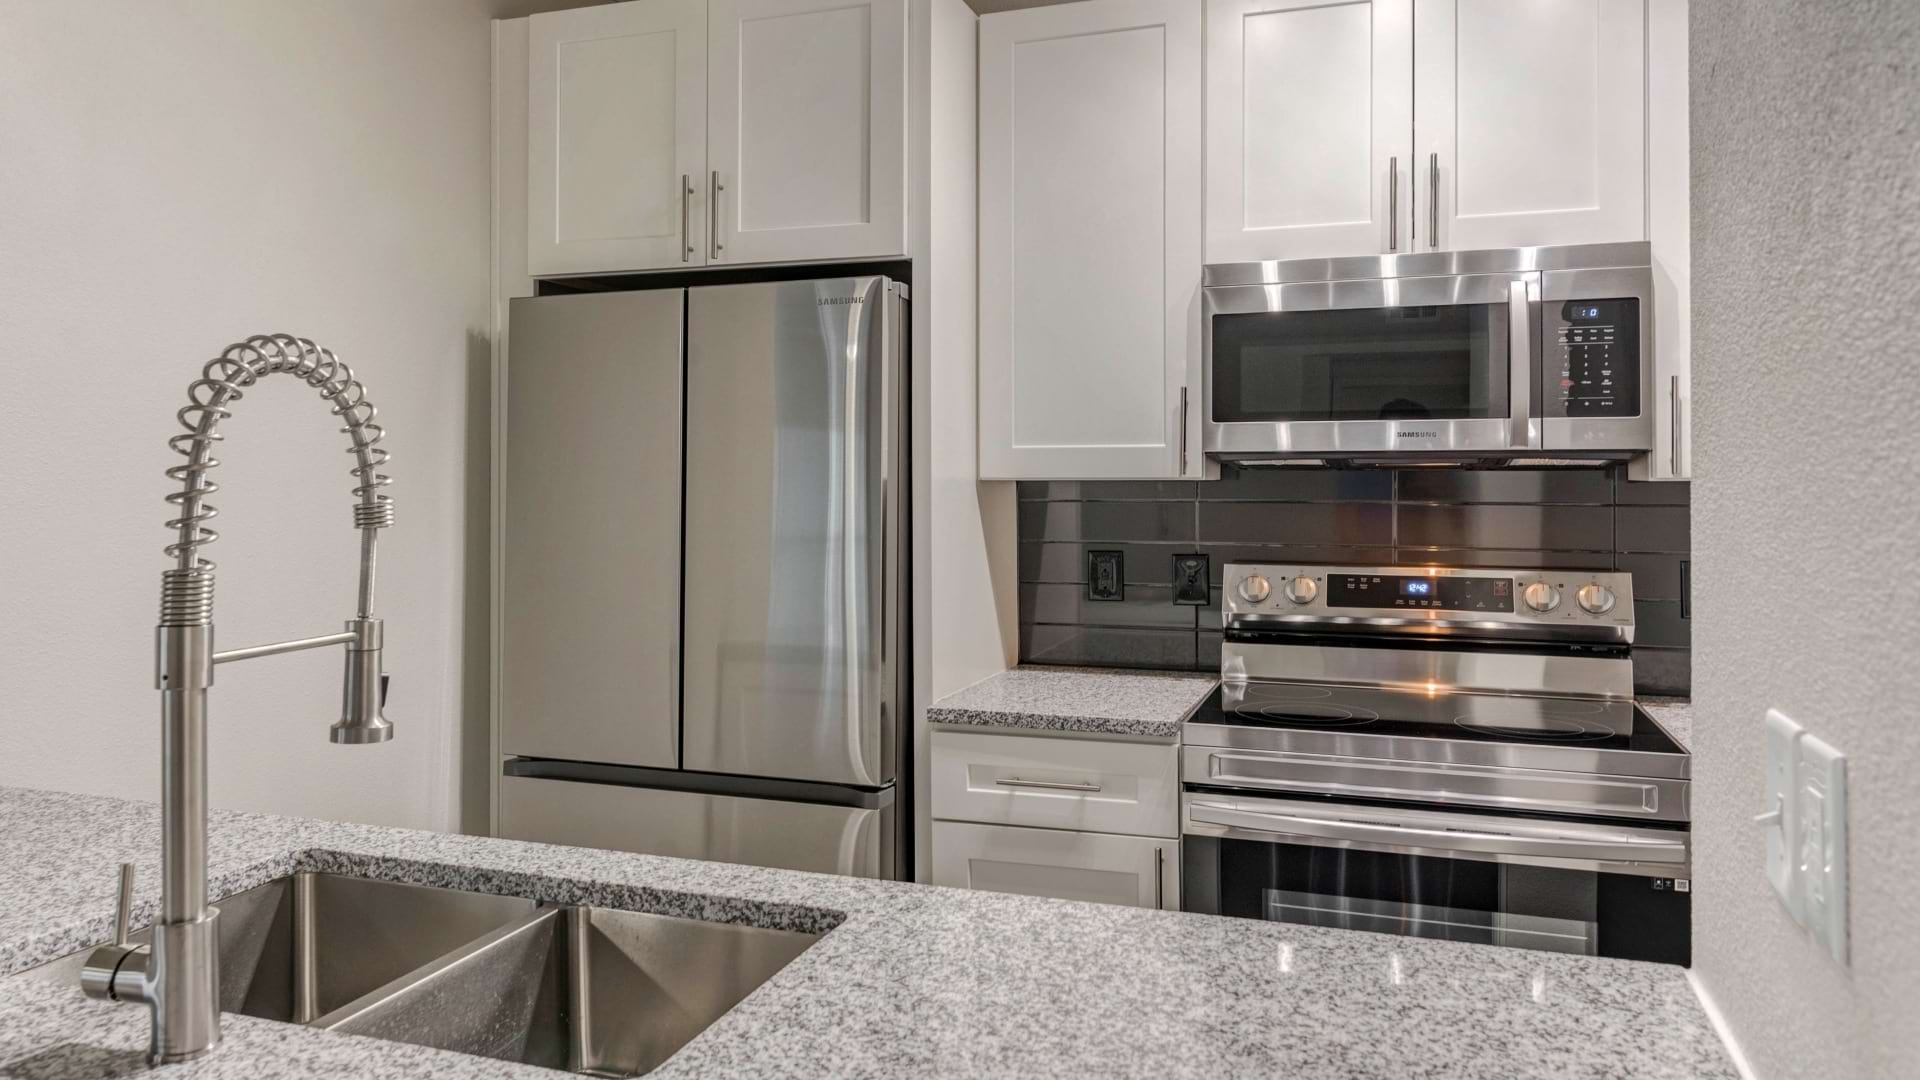 Luxury Kitchen at Our Apartments for Rent in West Houston